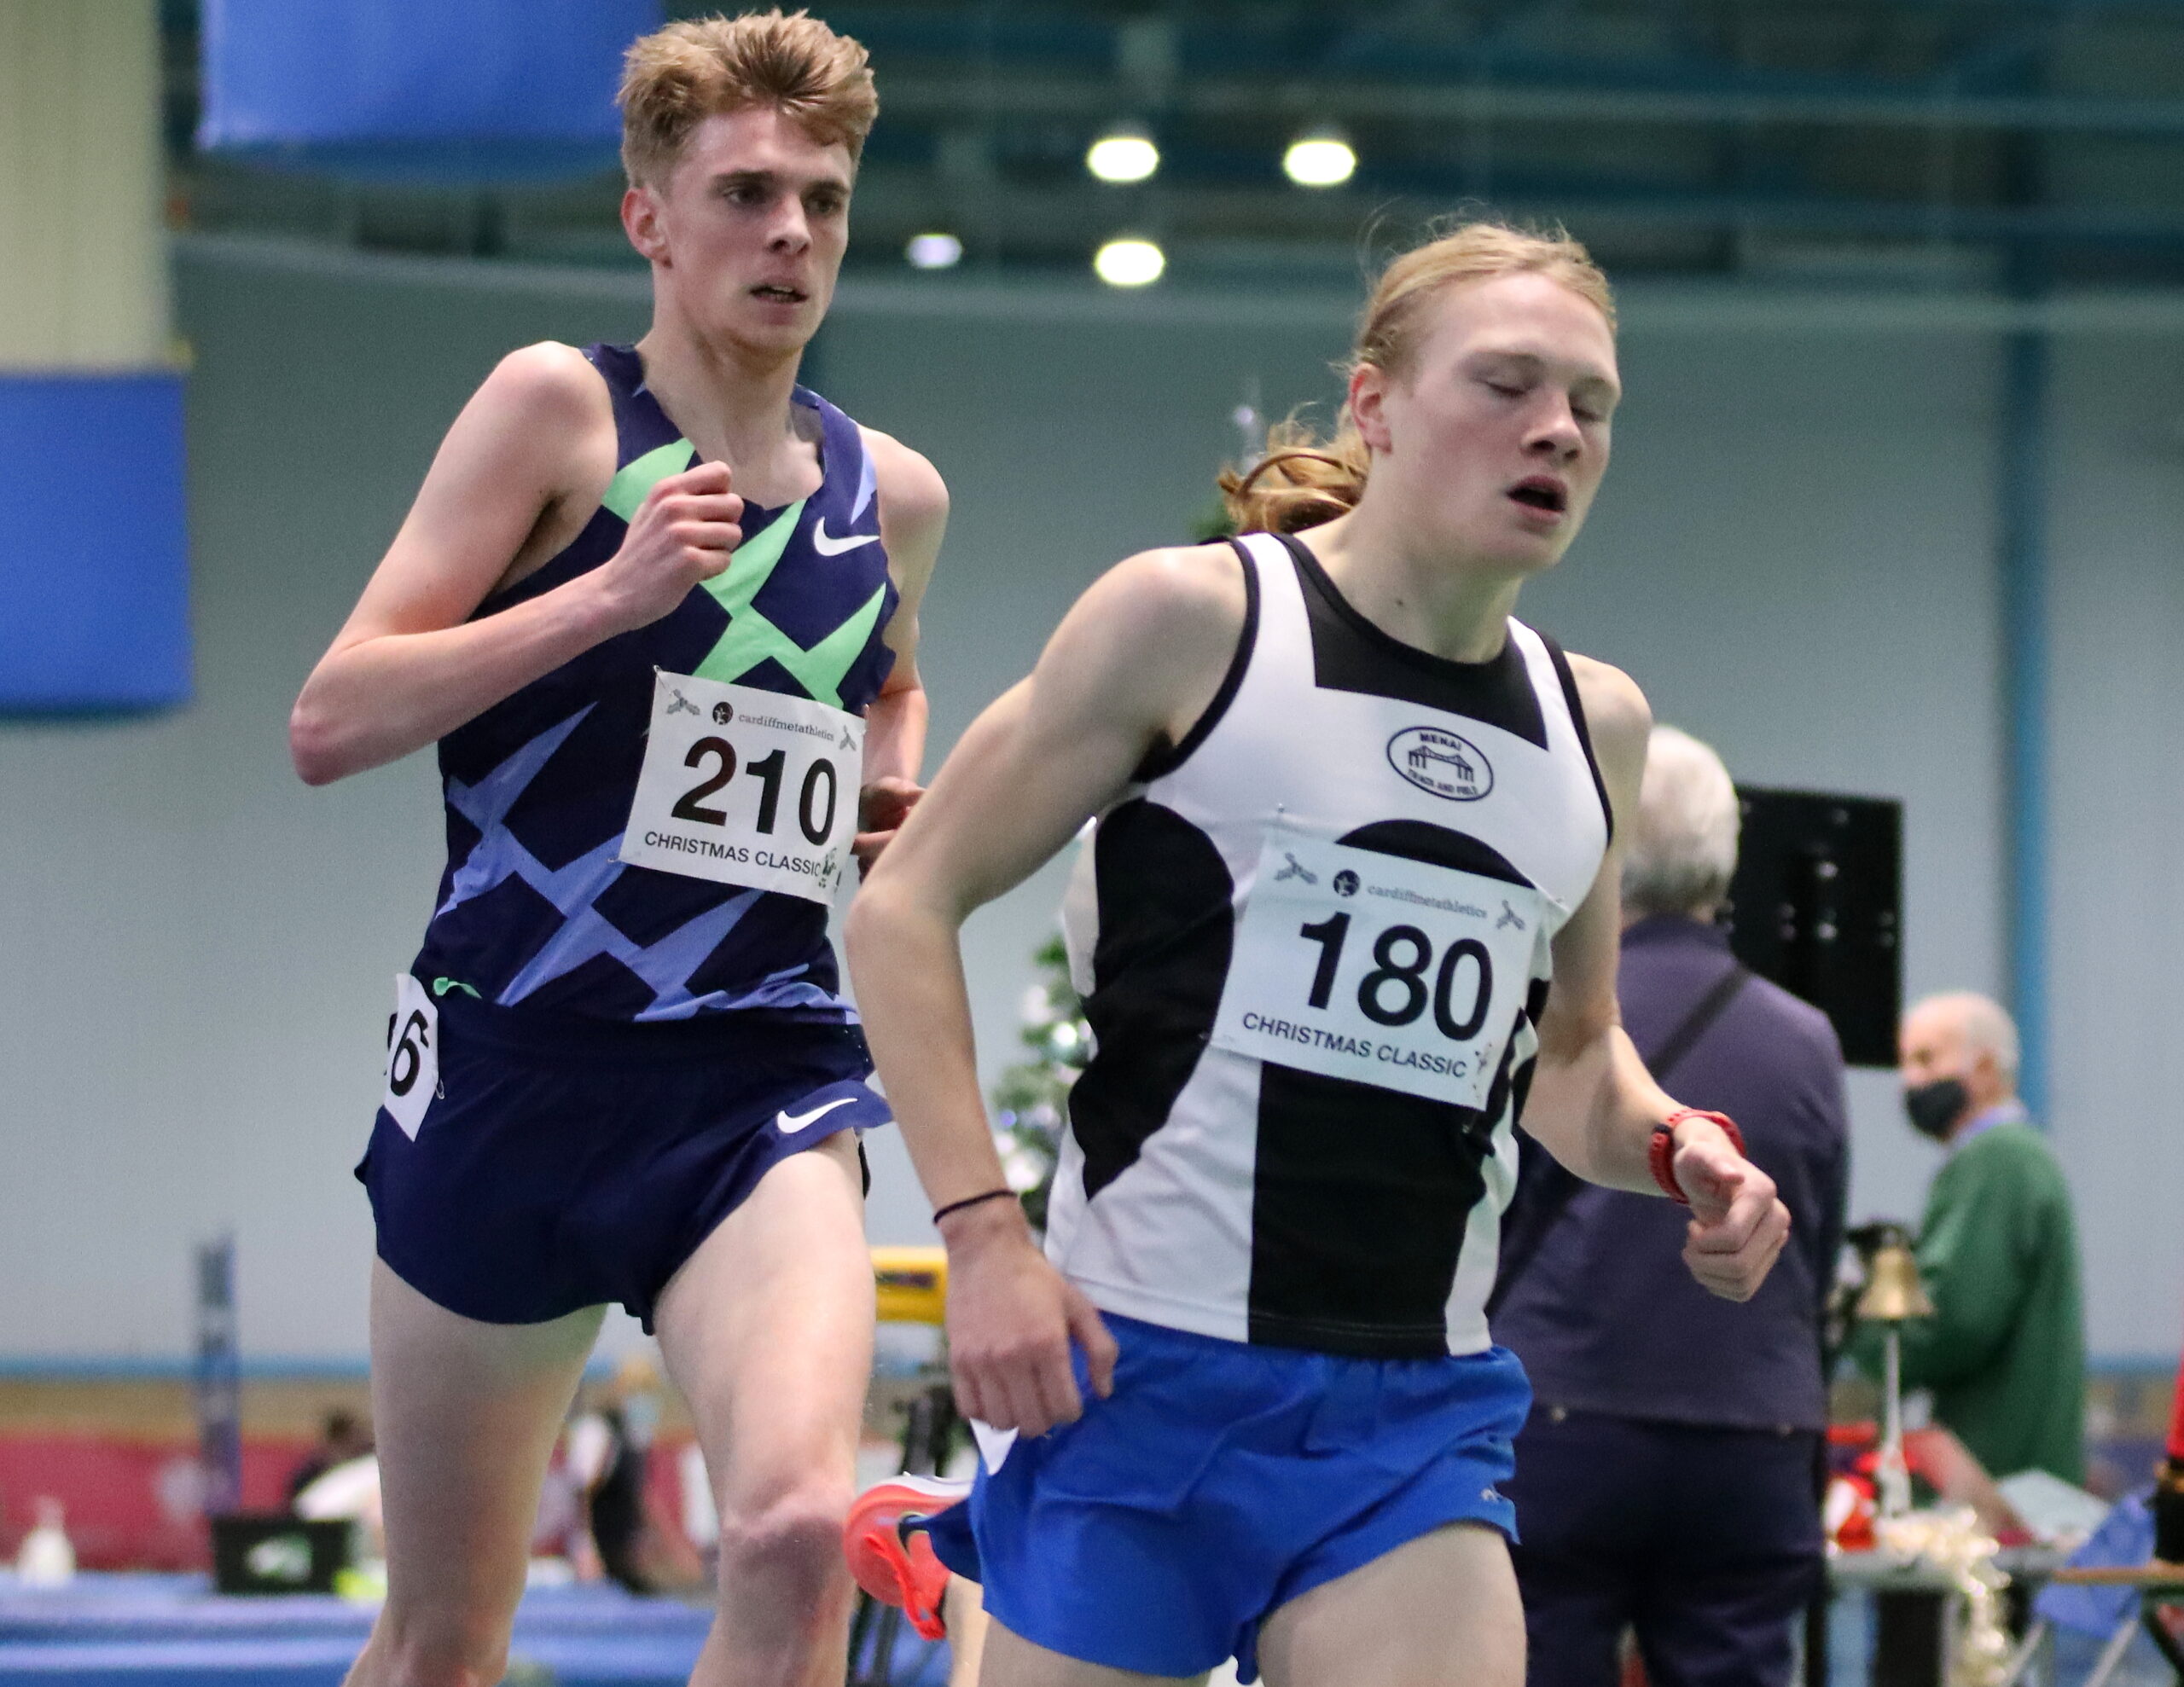 Osian Perrin And Jeremiah Azu Lead Way As Wales’ Young Guns Go Down A Storm In Manchester